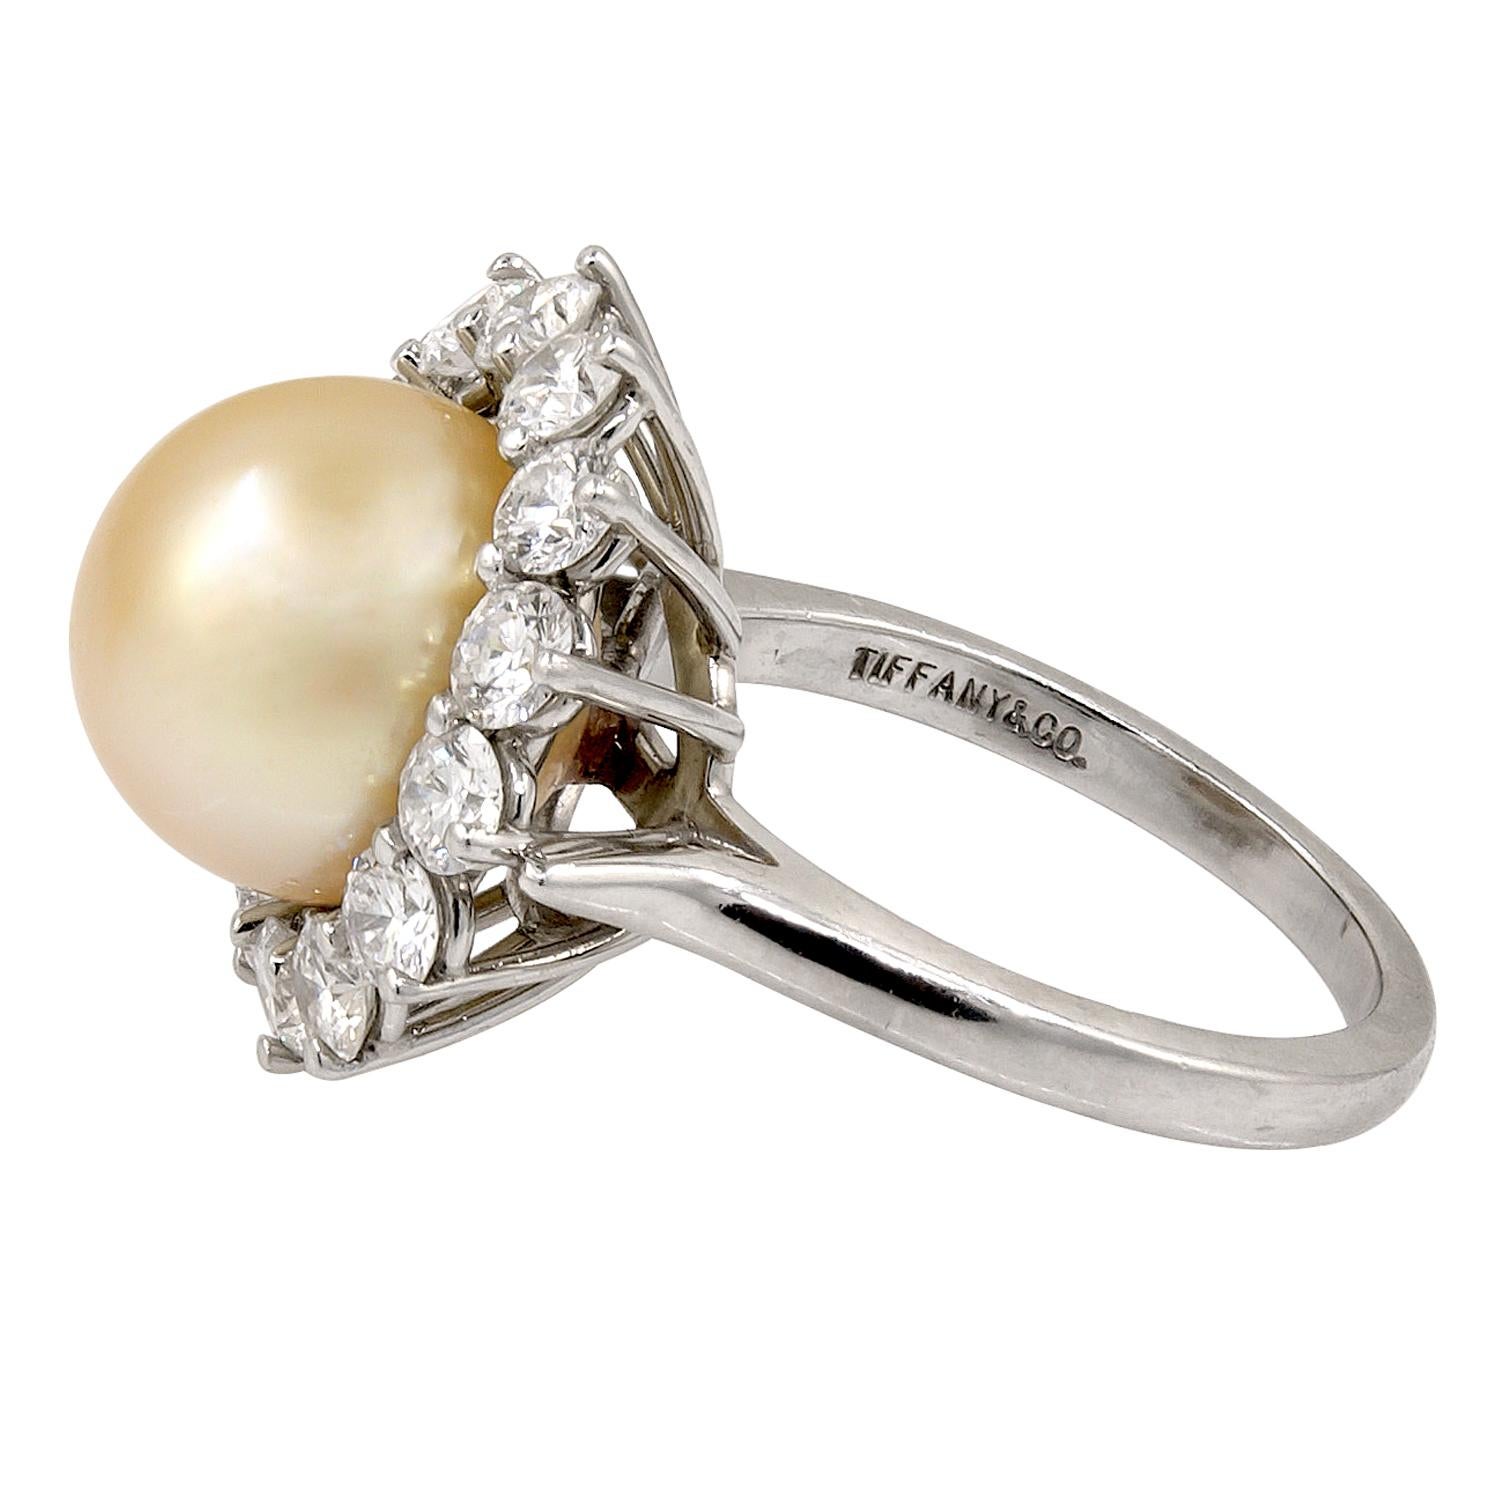 TIFFANY & Co. South Sea Pearl Diamond Platinum Ring.
Total diamond carat weight approx. 2.5 cts. and pearl approx. 11.8mm
ring size  7.75
Signed “TIFFANY & CO.“; circa 2000